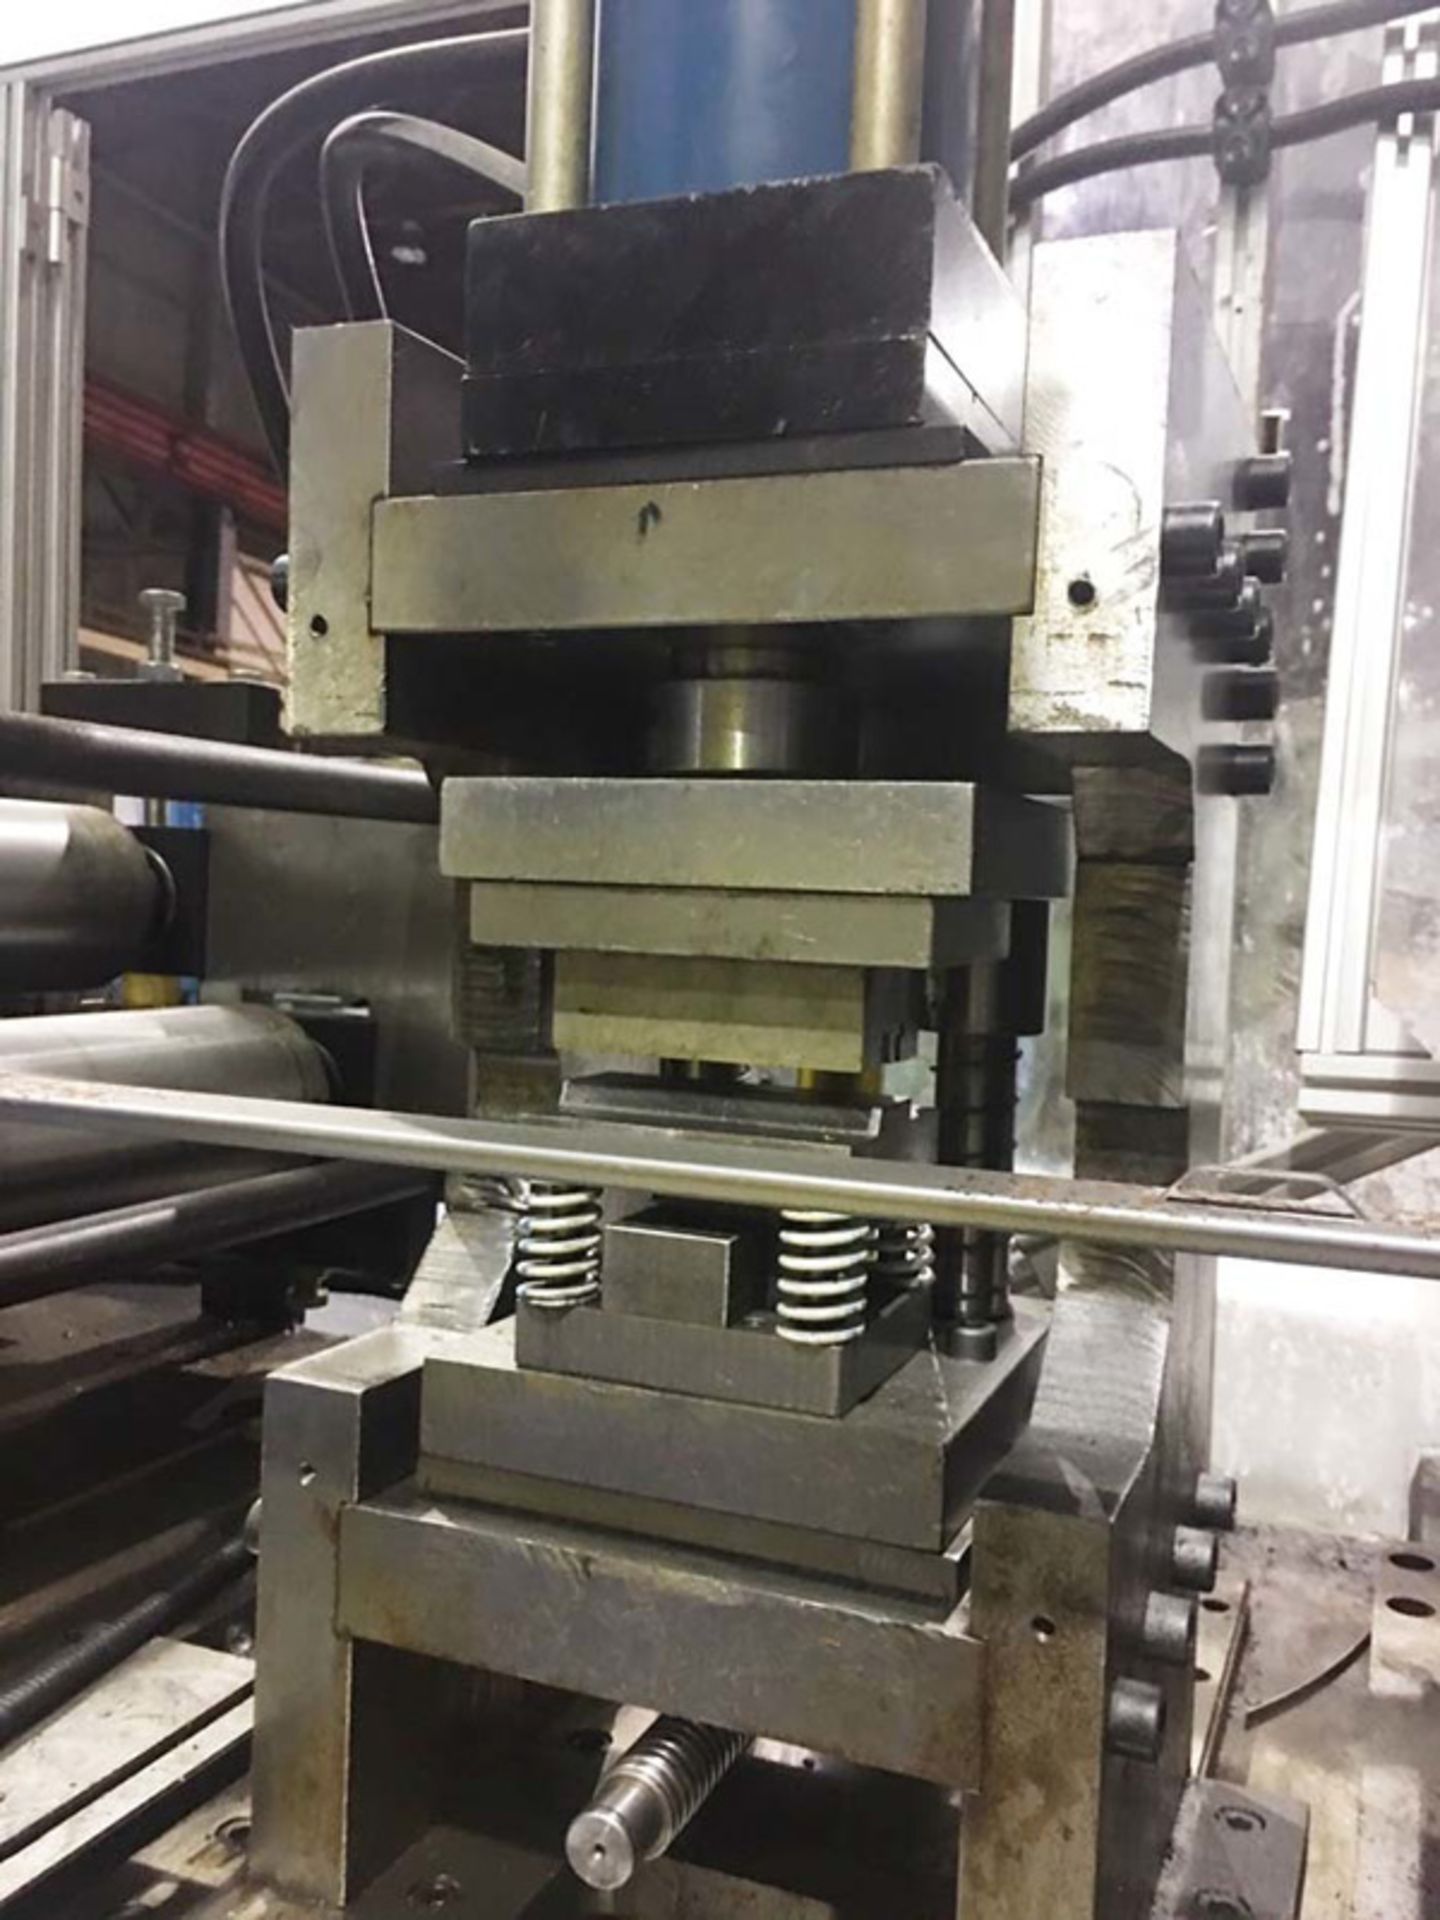 2016 ACL Rollforming Line | 14 Stand x 13.75" RS x 1.5" Shaft, Mdl: LZJ-HCB, S/N: 16111001 - 8448P - Image 10 of 12